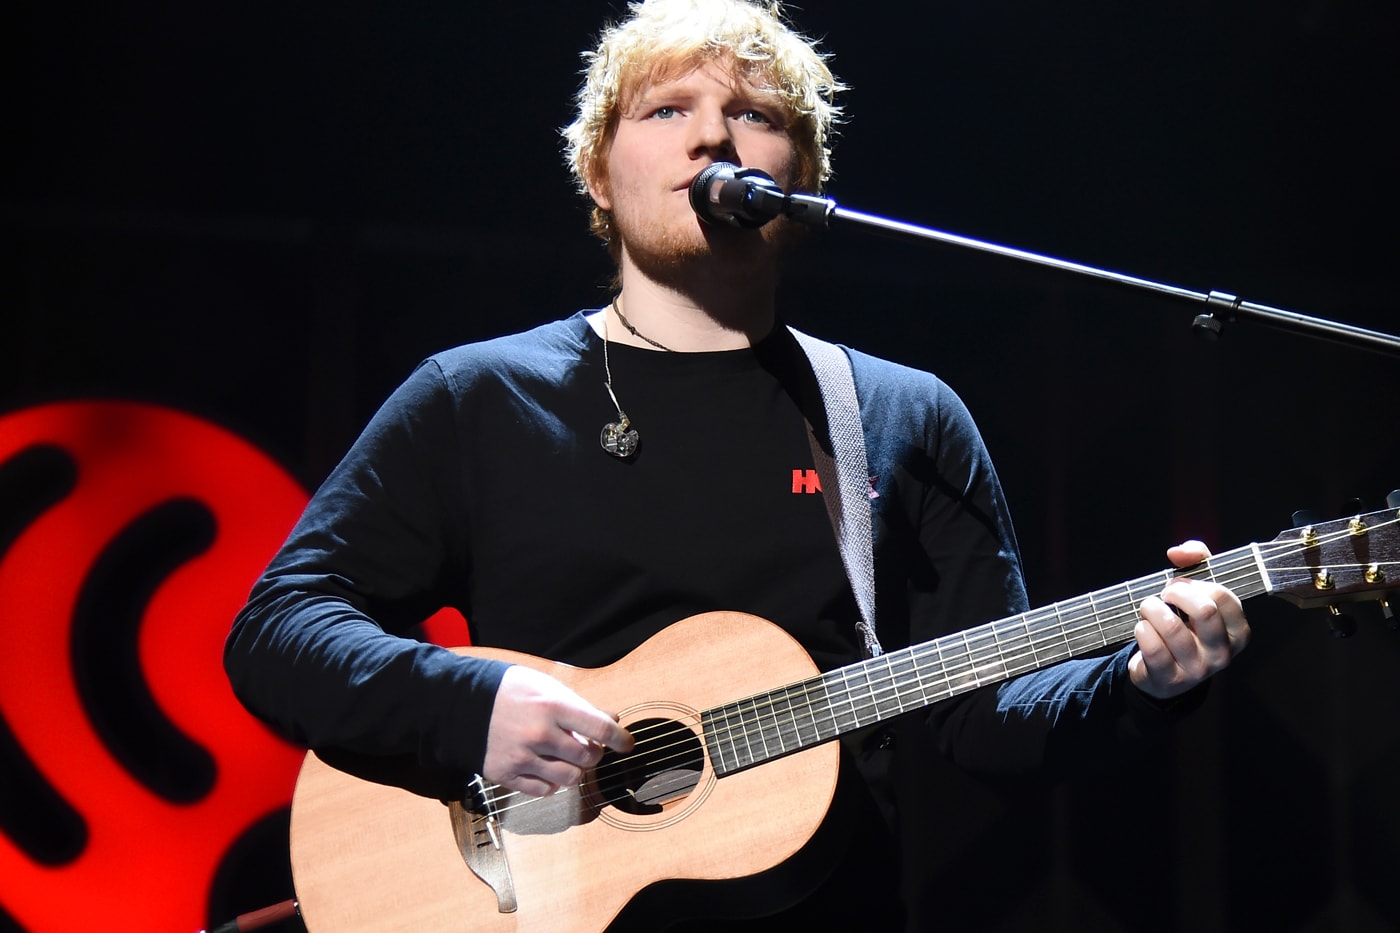 Ed Sheeran Did Not Write "Love Yourself" For Justin Bieber